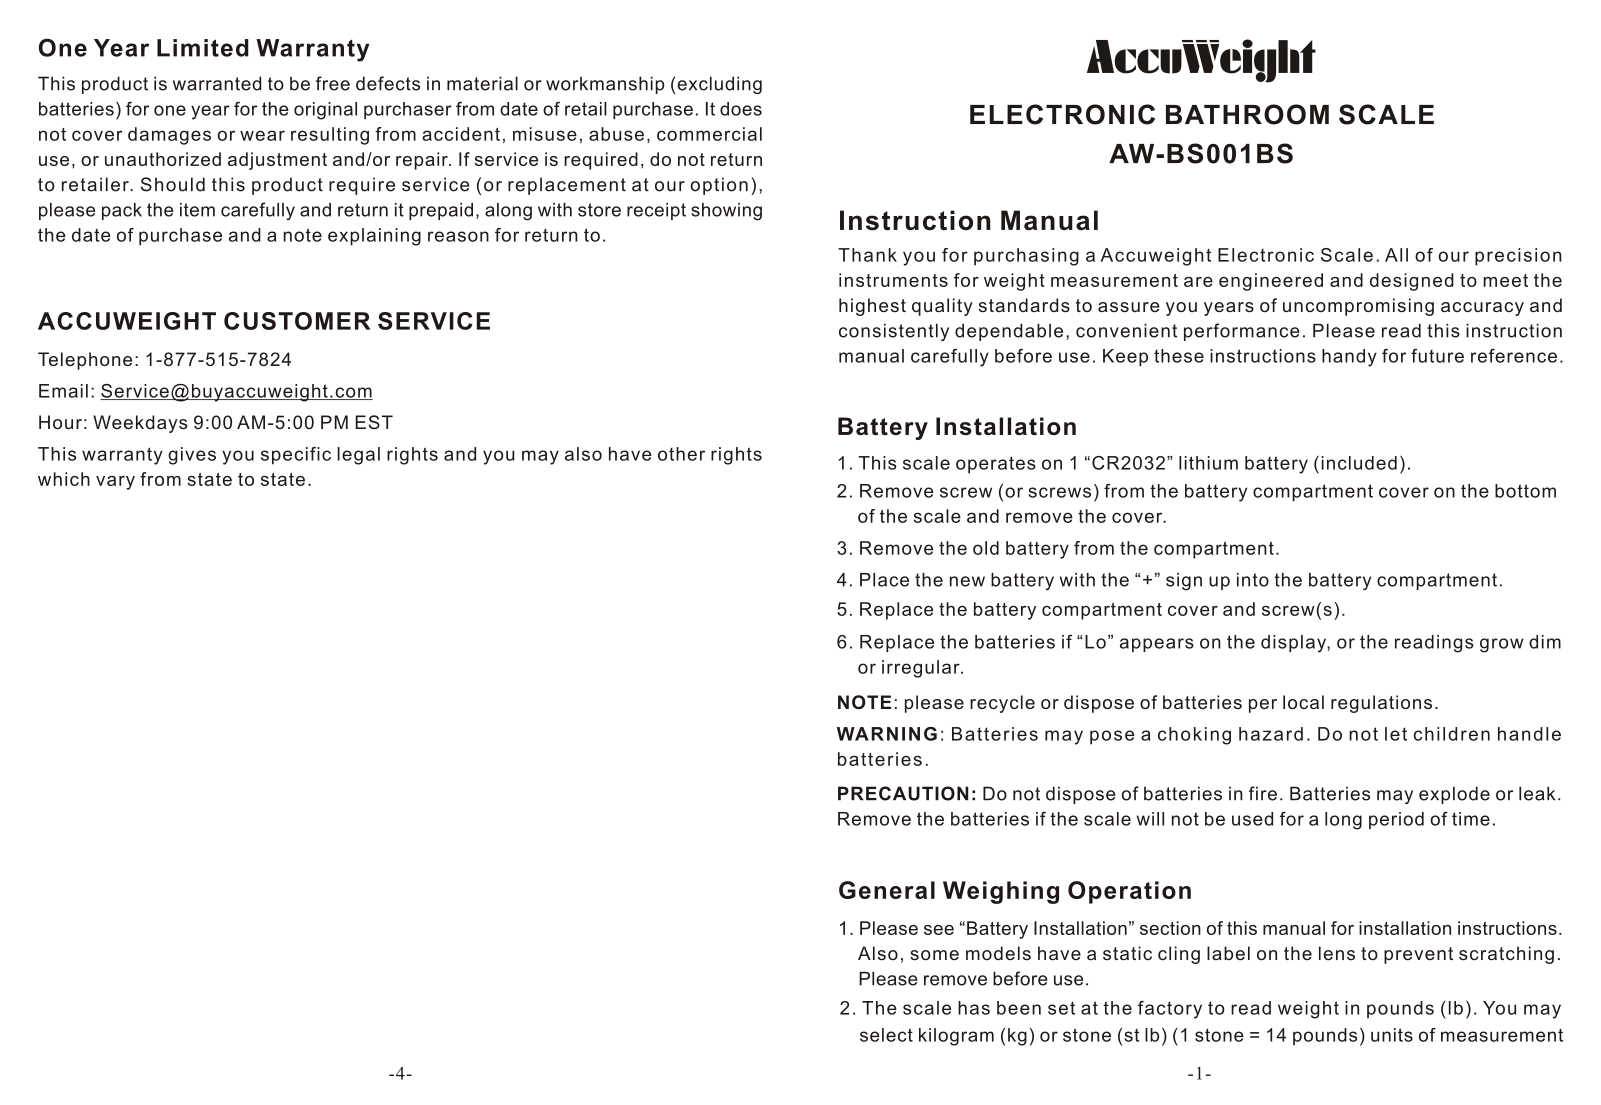 Accuweight AW-BS001BS User Manual